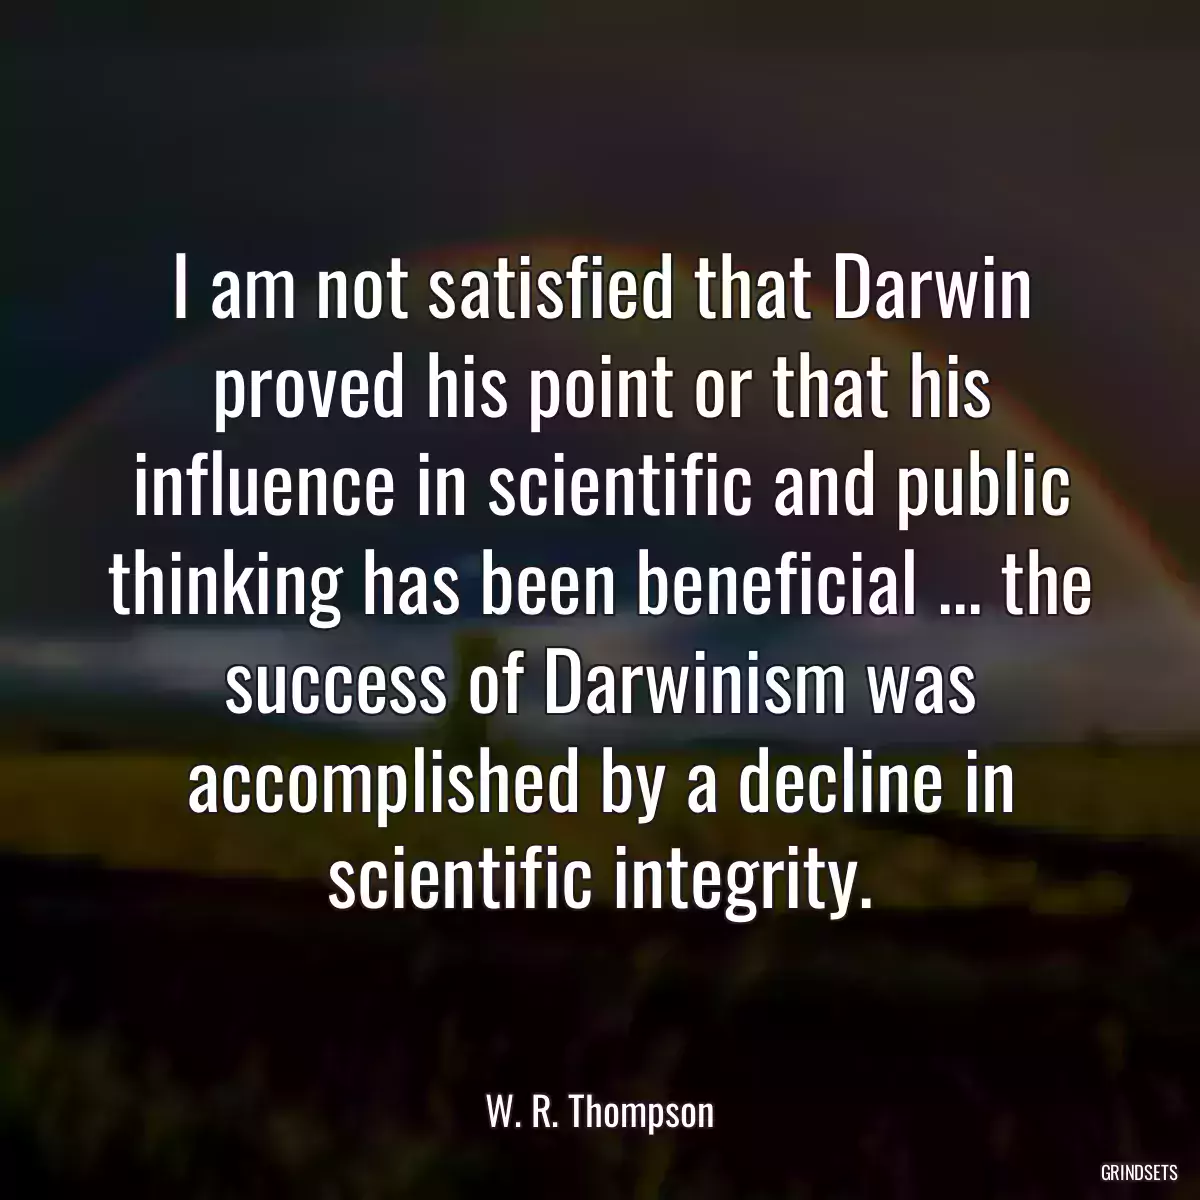 I am not satisfied that Darwin proved his point or that his influence in scientific and public thinking has been beneficial ... the success of Darwinism was accomplished by a decline in scientific integrity.